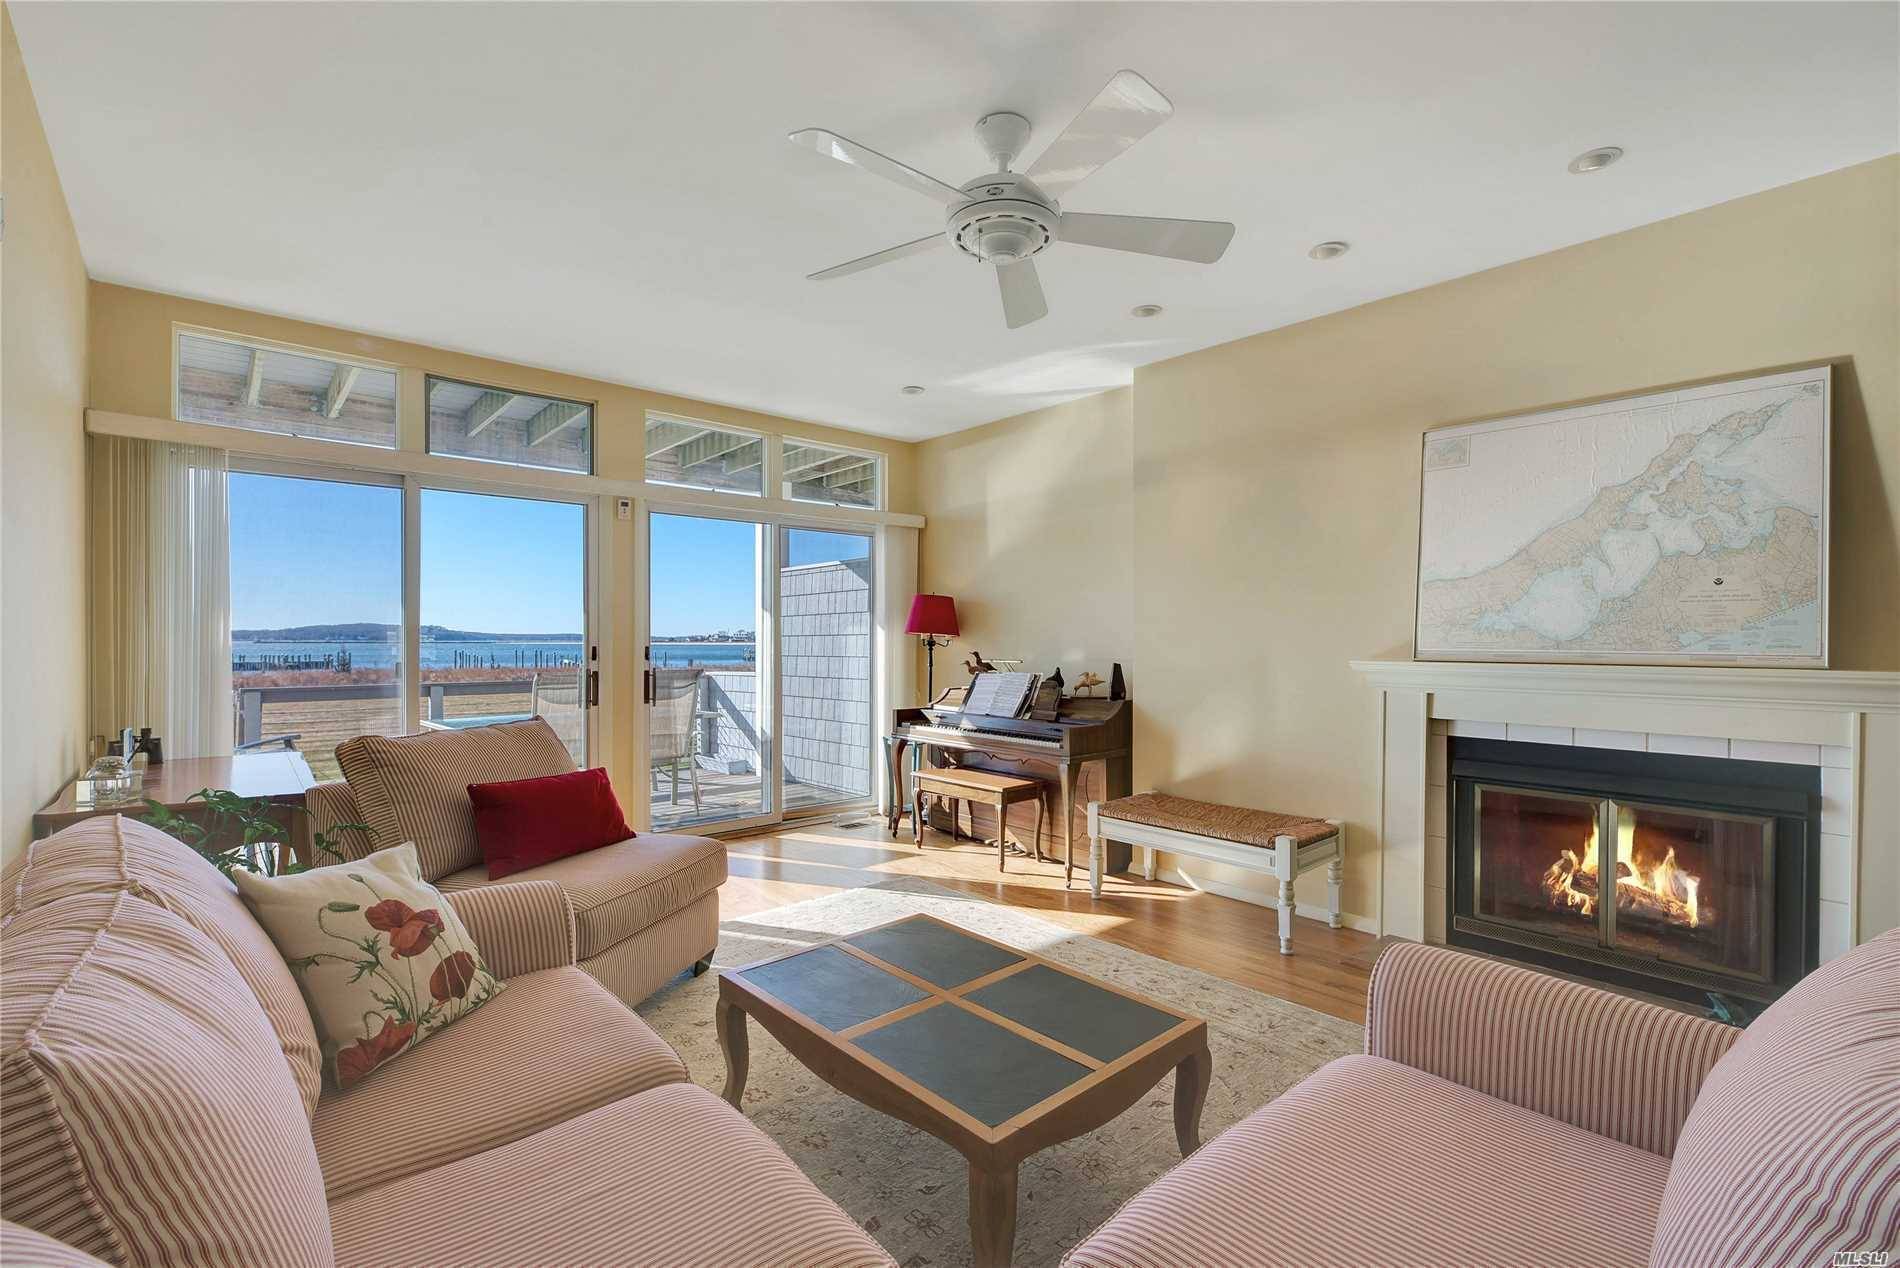 Discover Bay Front Condo Living At Its Best In This Lovingly Maintained Townhouse At Cleaves Point.